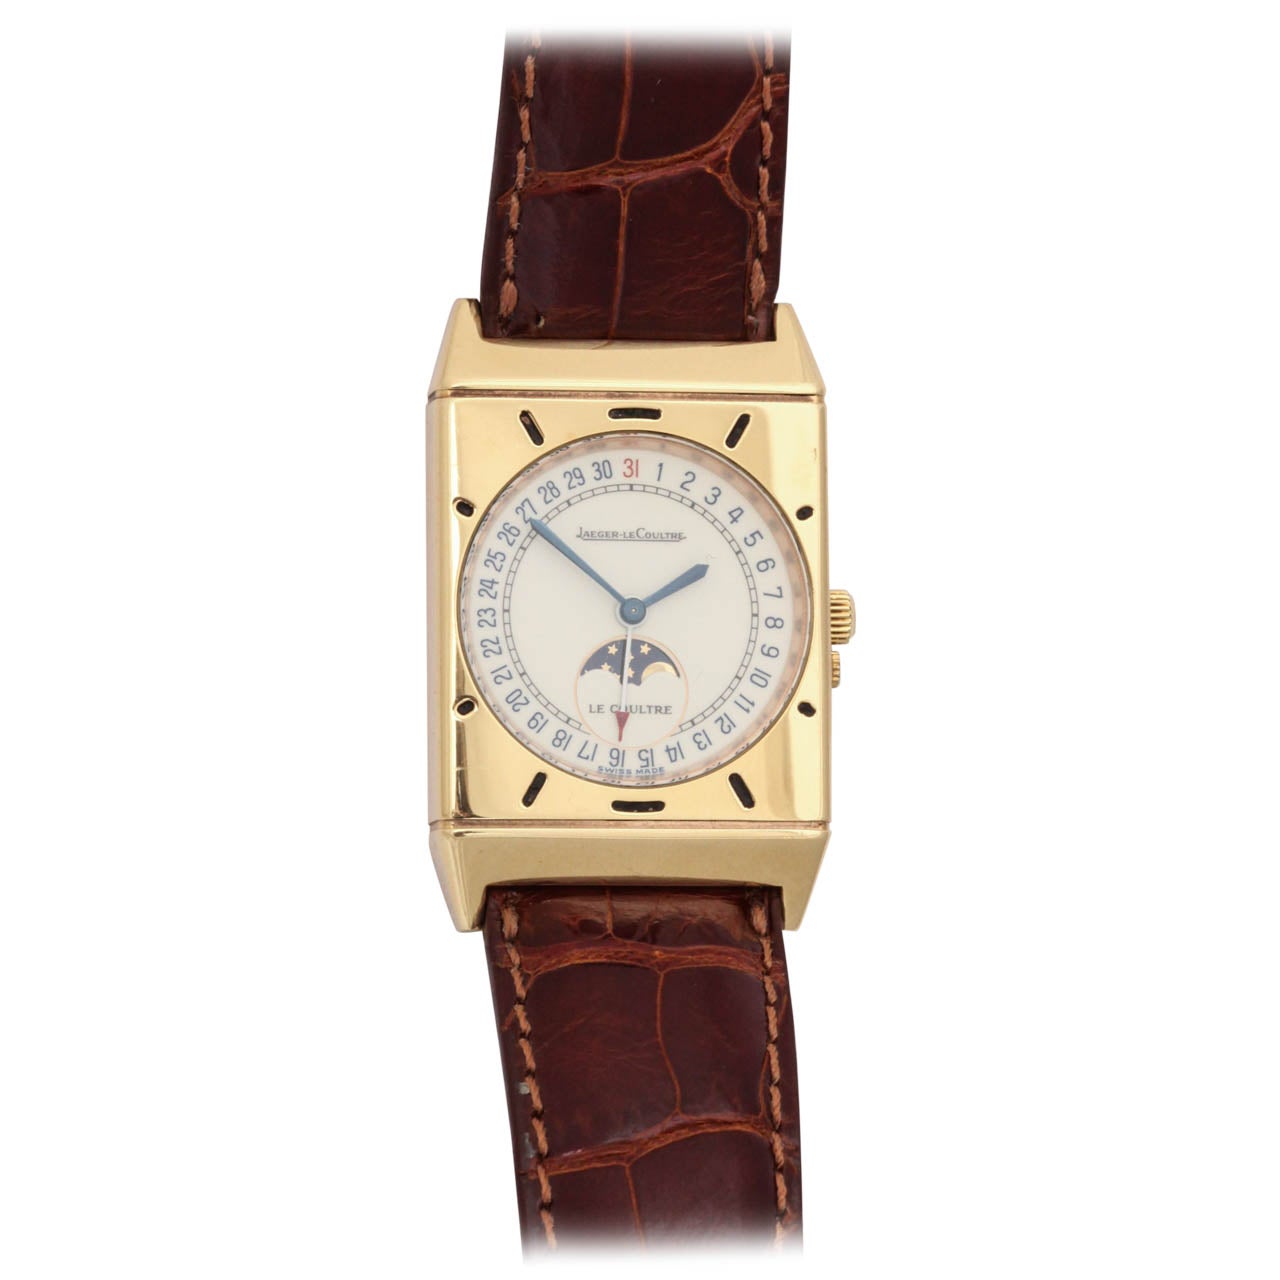 Jaeger-LeCoultre 18kt Gold Wristwatch with Calendar and Moonphase Function